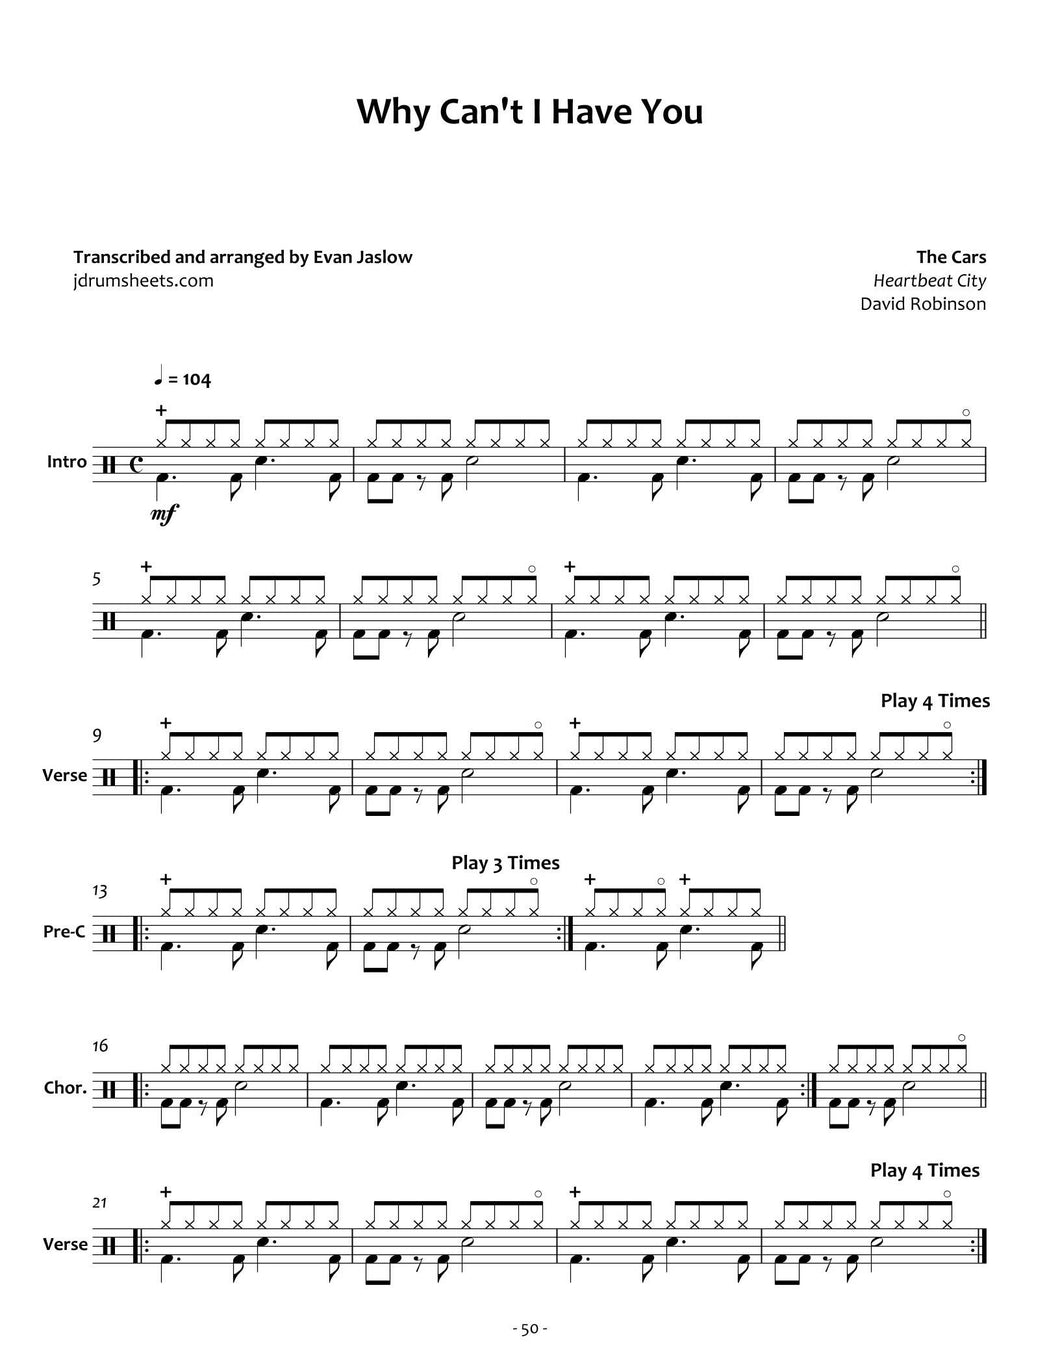 Why Can't I Have You - The Cars - Full Drum Transcription / Drum Sheet Music - Jaslow Drum Sheets